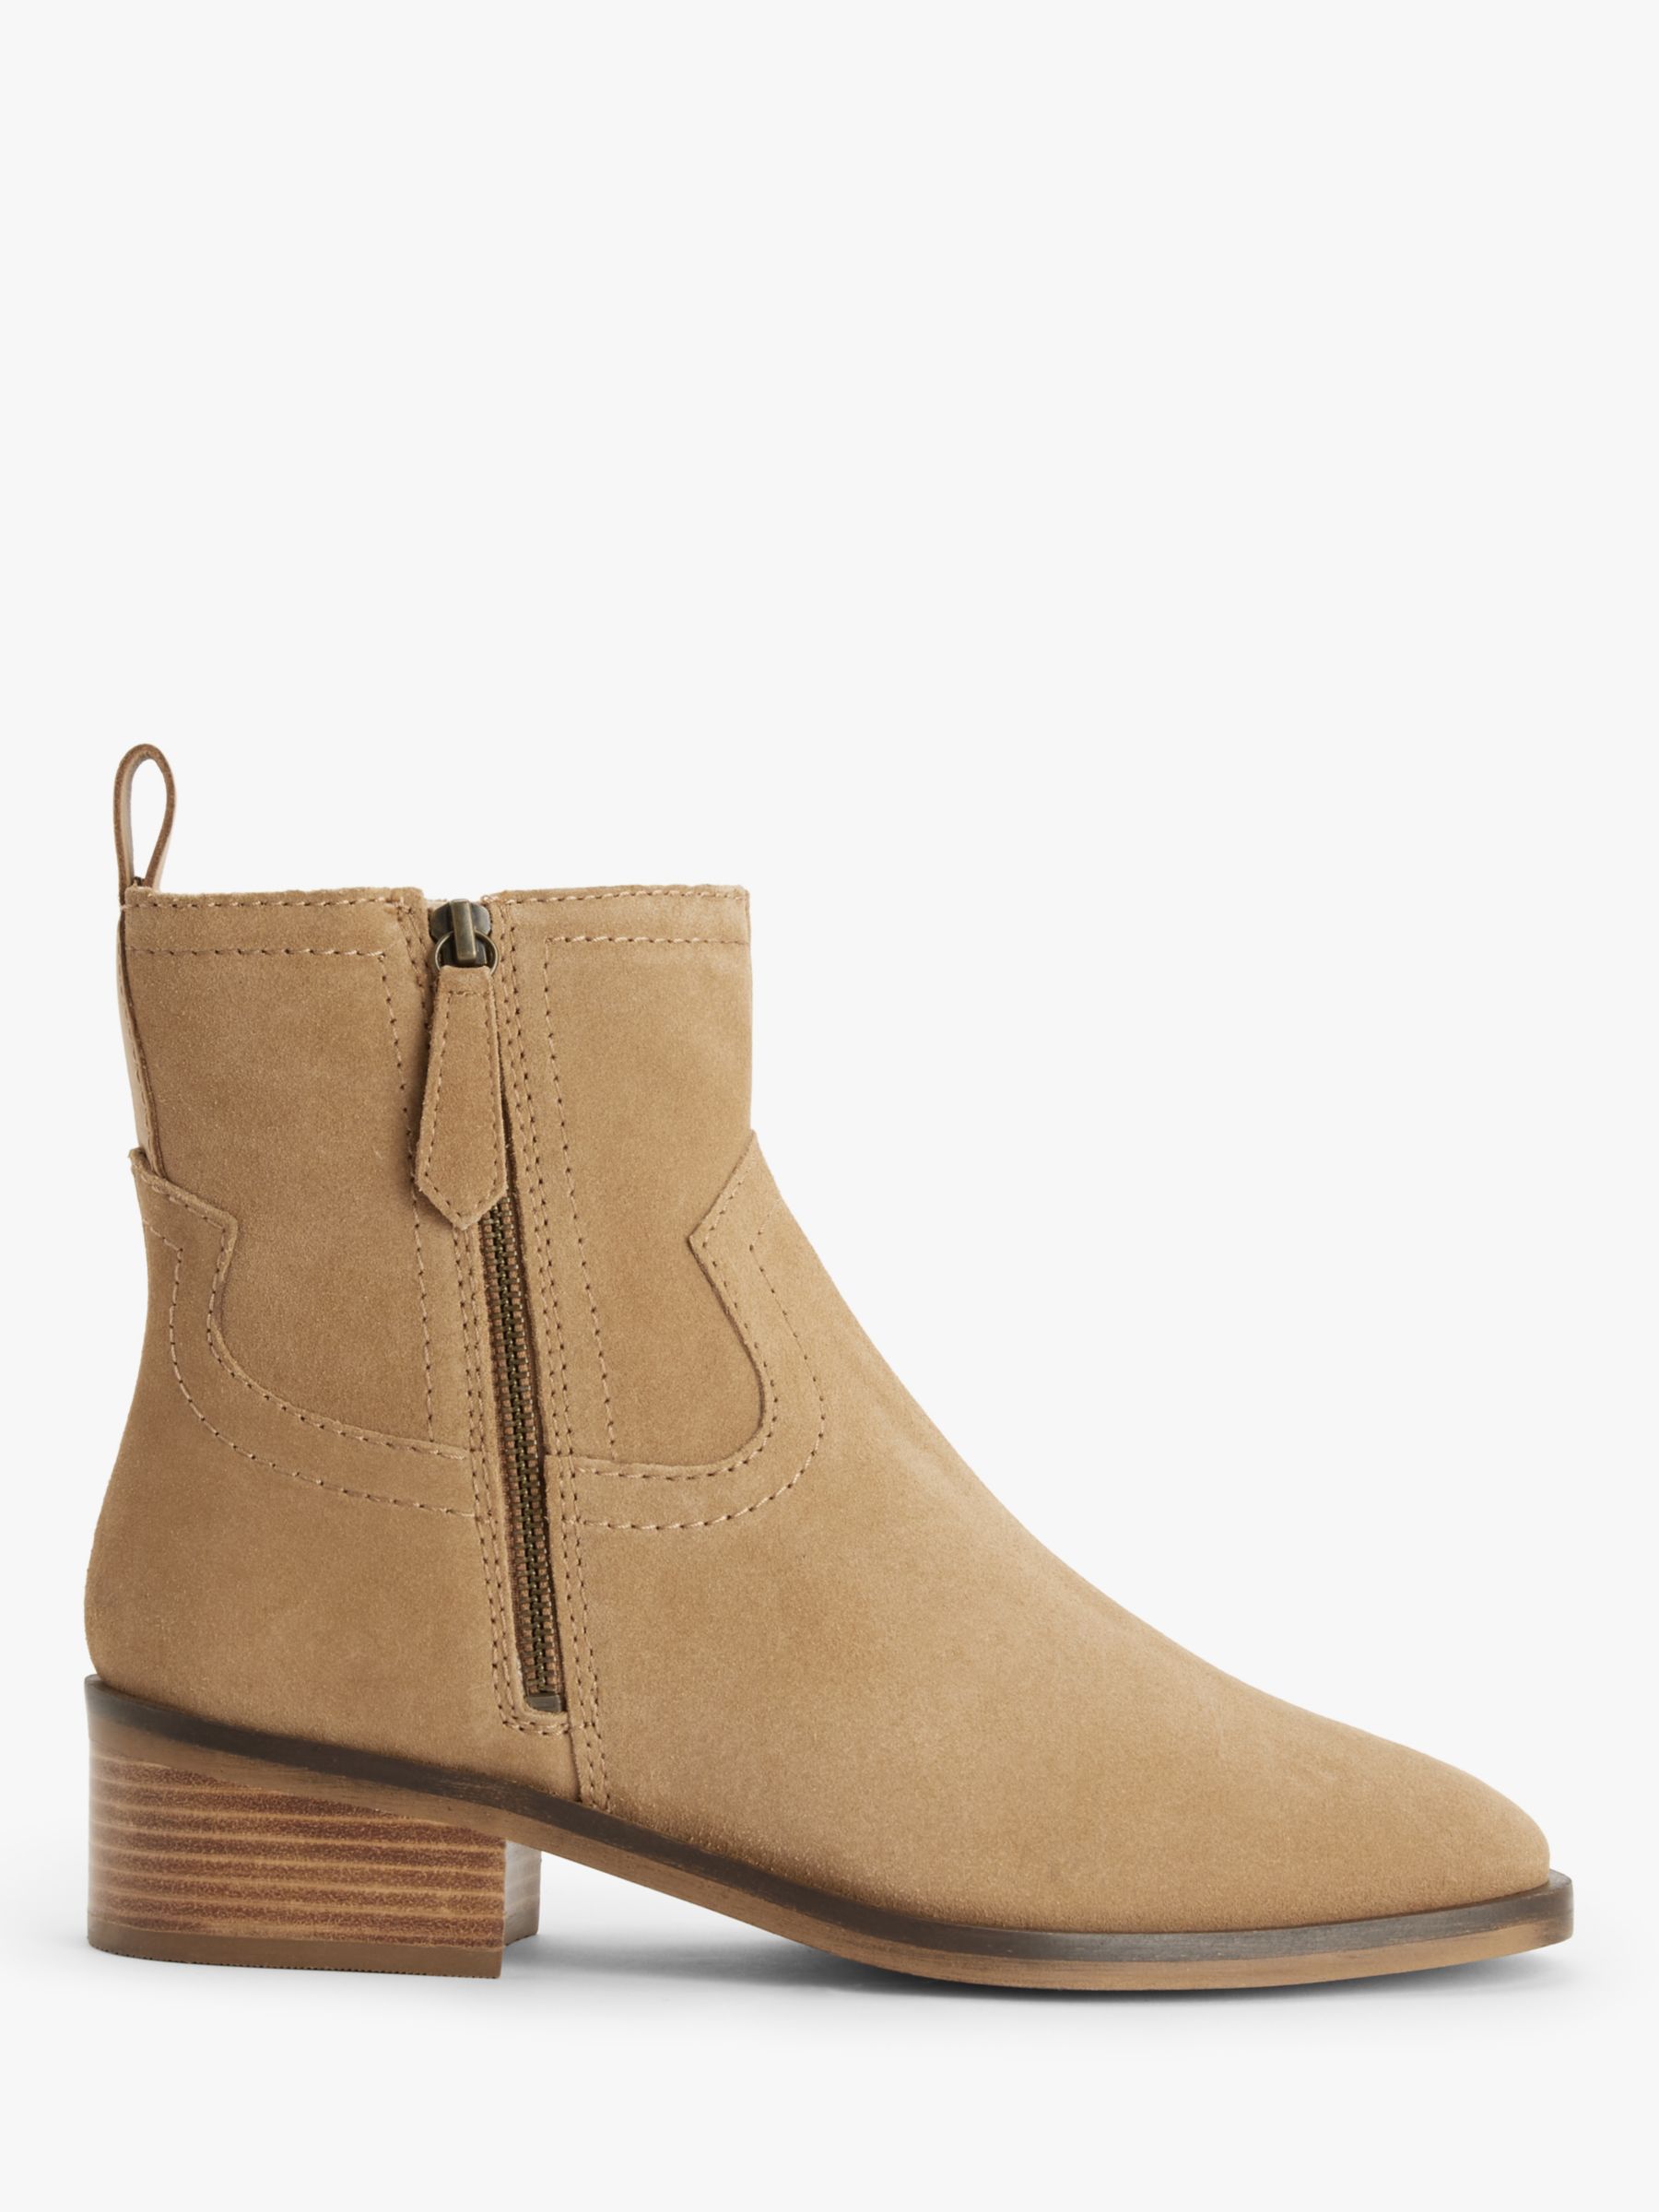 AND/OR Pablo Suede Square Toe Borg Lined Ankle Boots, Beige at John ...